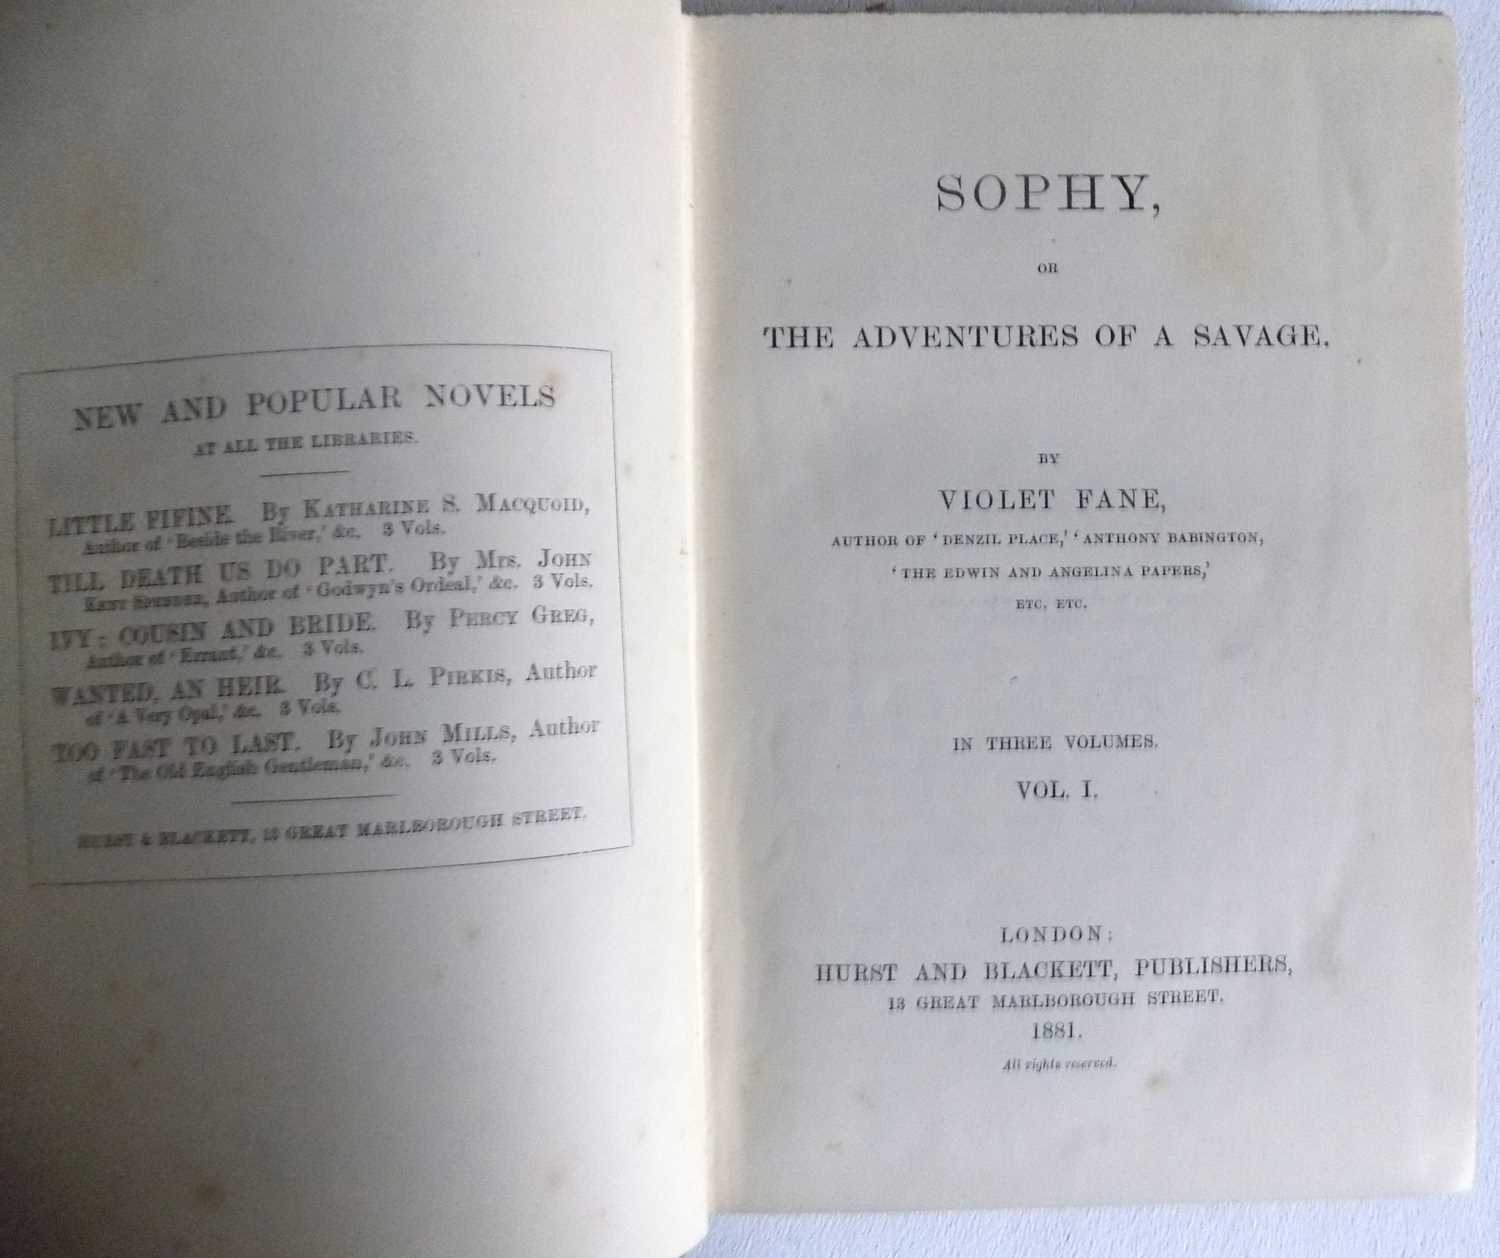 VIOLET FANE. "Sophy, or, The Adventures of a Savage." 3 Vols 1st edn, signed in Vol 3, and